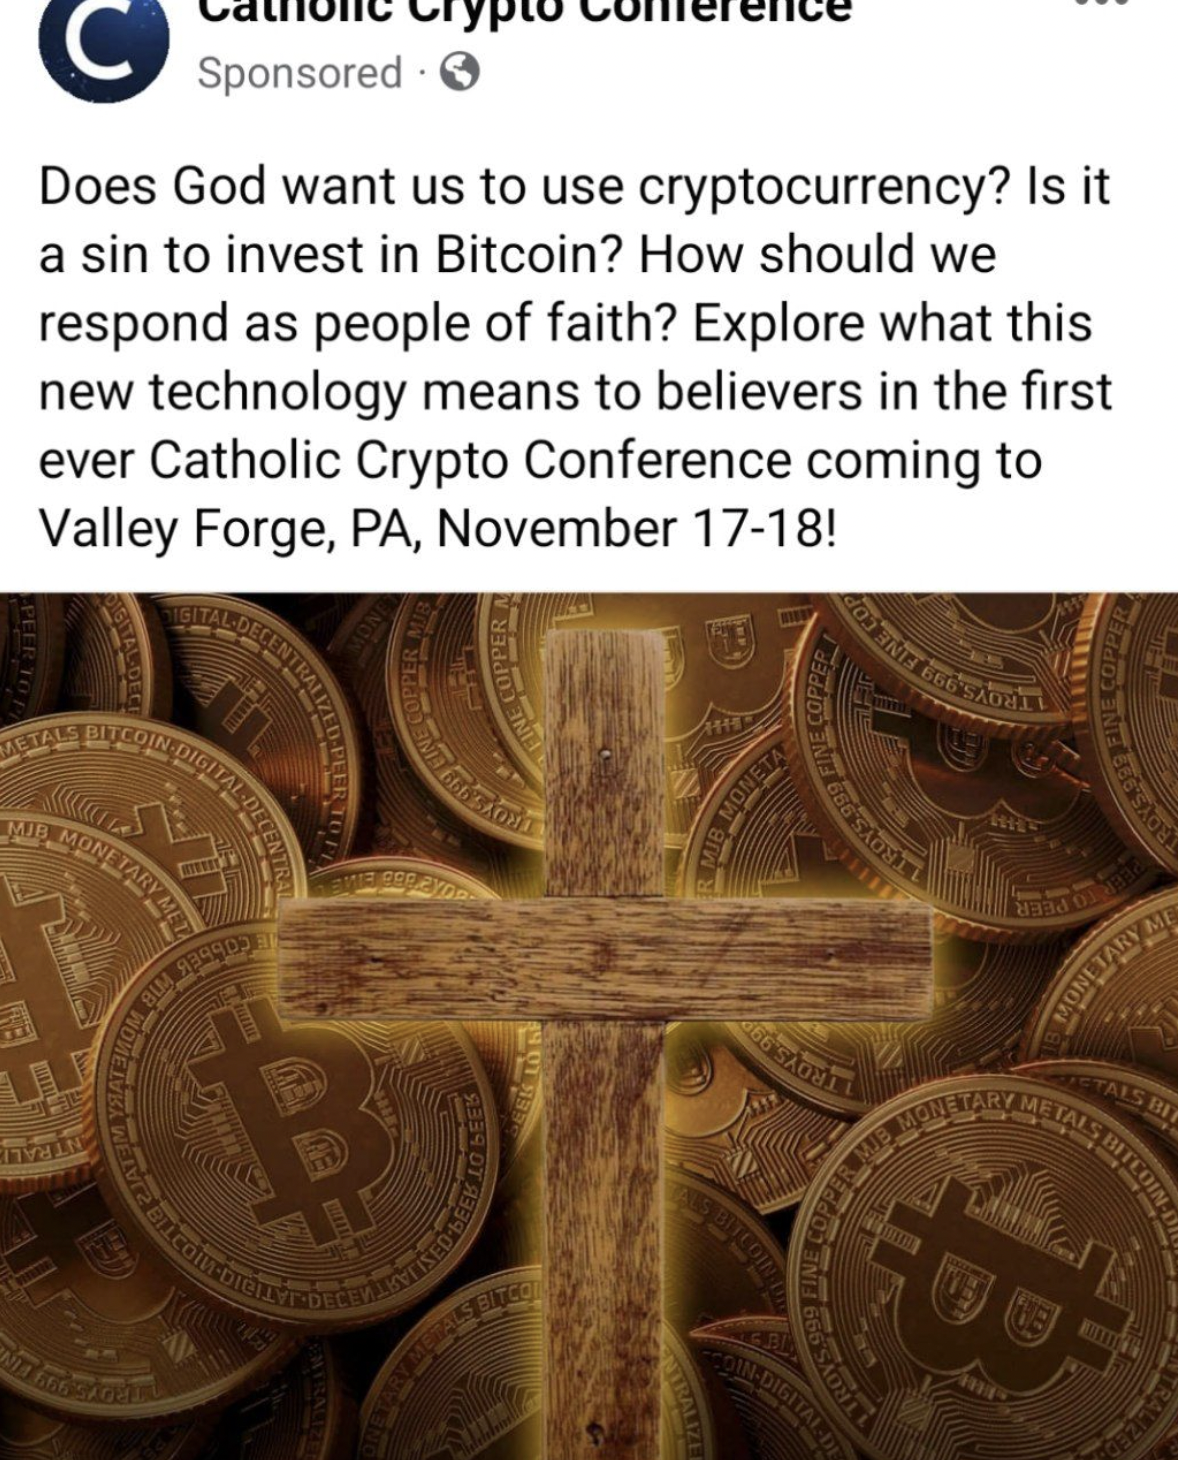 Insane People of Facebook - pattern - Sponsored Does God want us to use cryptocurrency? Is it a sin to invest in Bitcoin? How should we respond as people of faith? Explore what this new technology means to believers in the first ever Catholic Crypto Conf